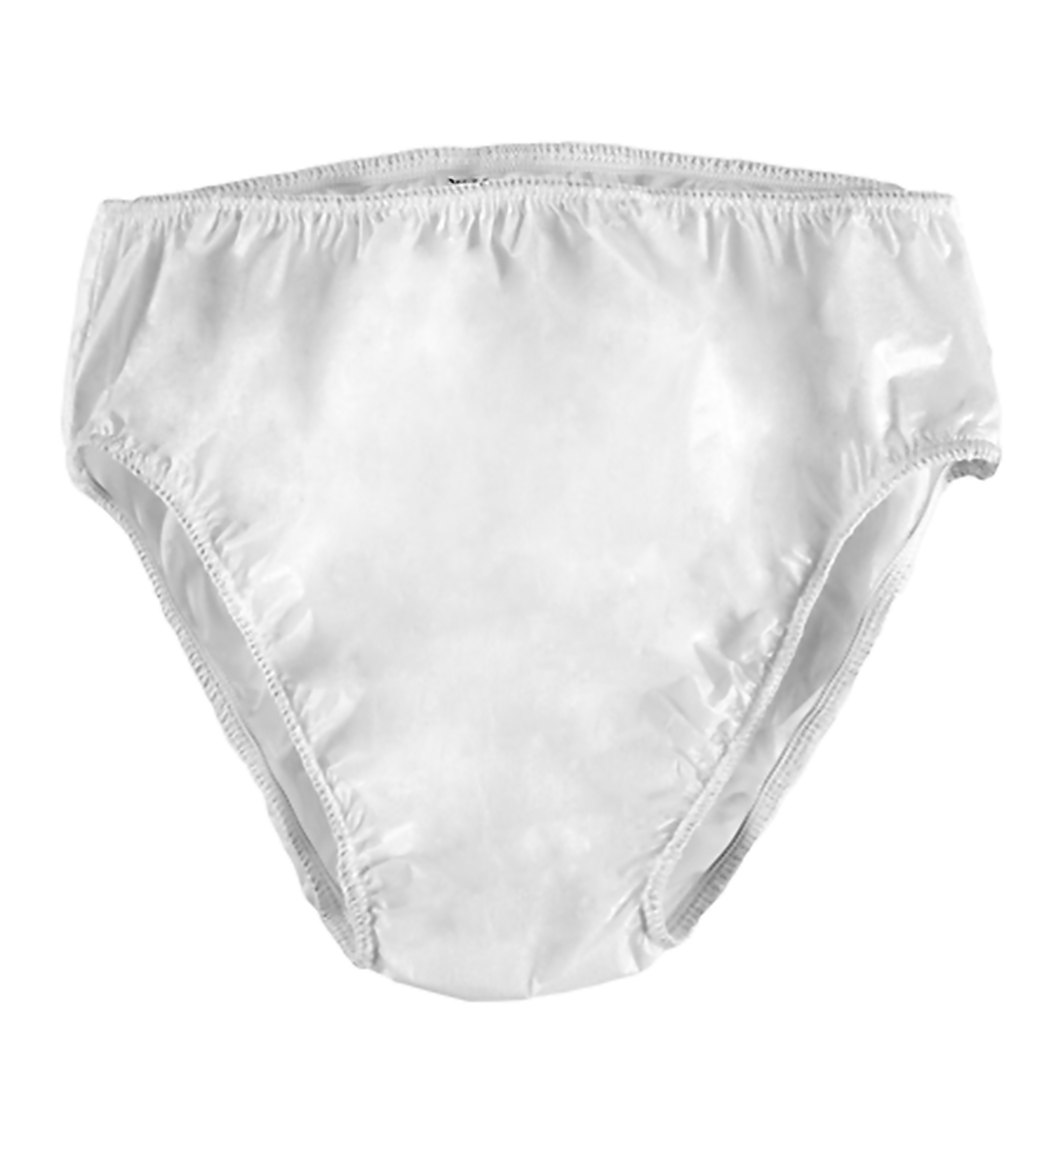 My Pool Pal Disposable Swimster Swim Diaper - White 24 Mos 18-25Lbs Size Months - Swimoutlet.com